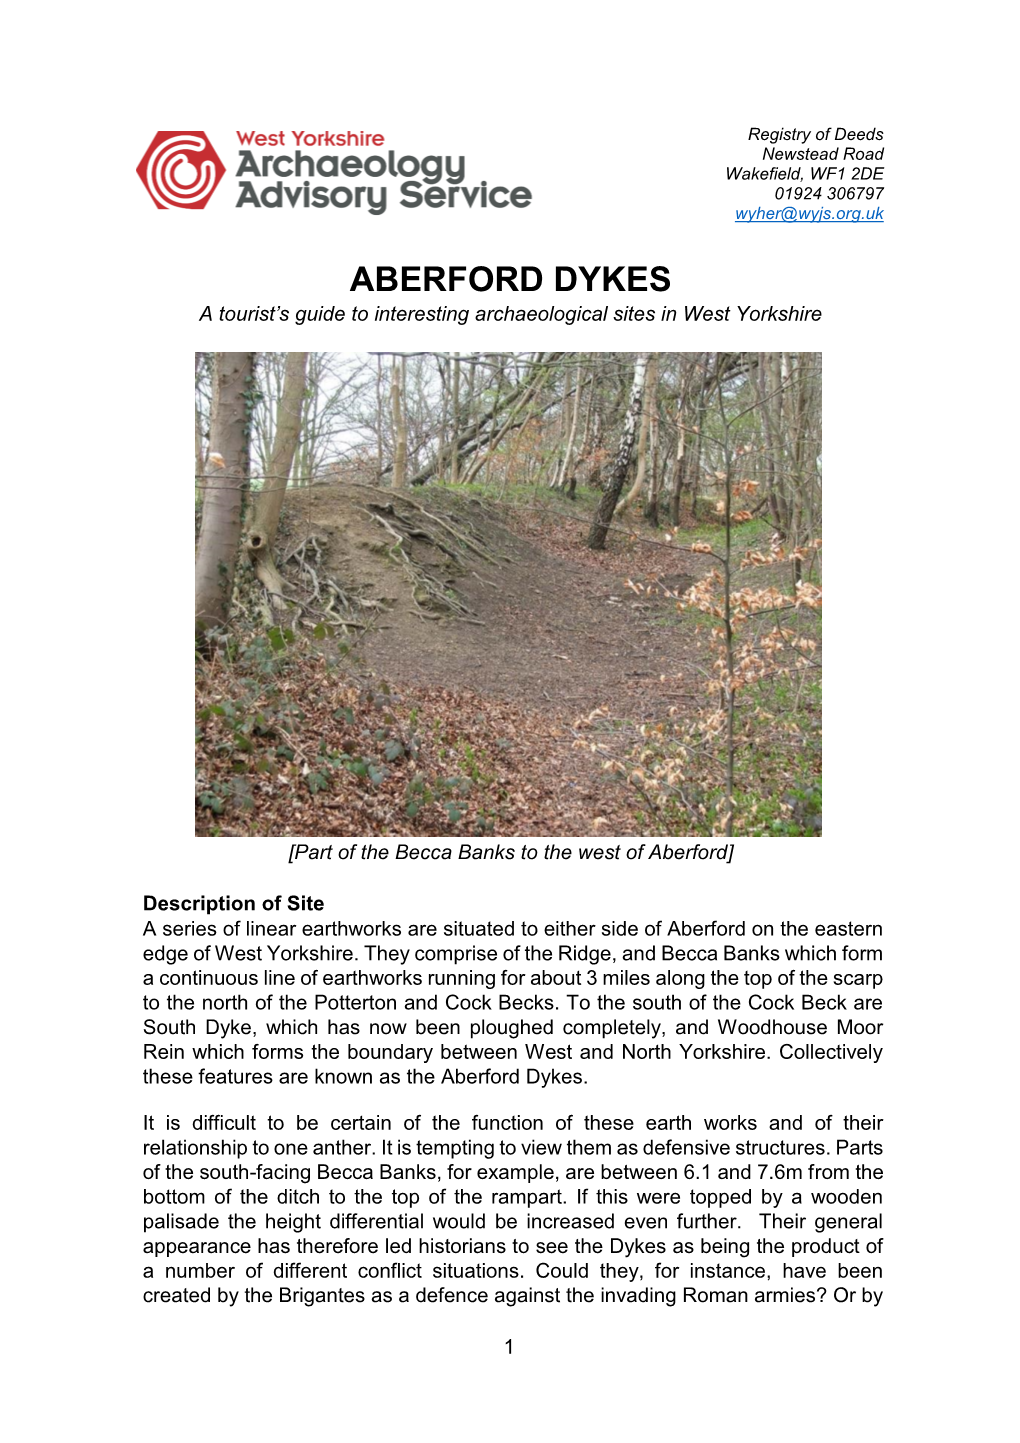 ABERFORD DYKES a Tourist’S Guide to Interesting Archaeological Sites in West Yorkshire